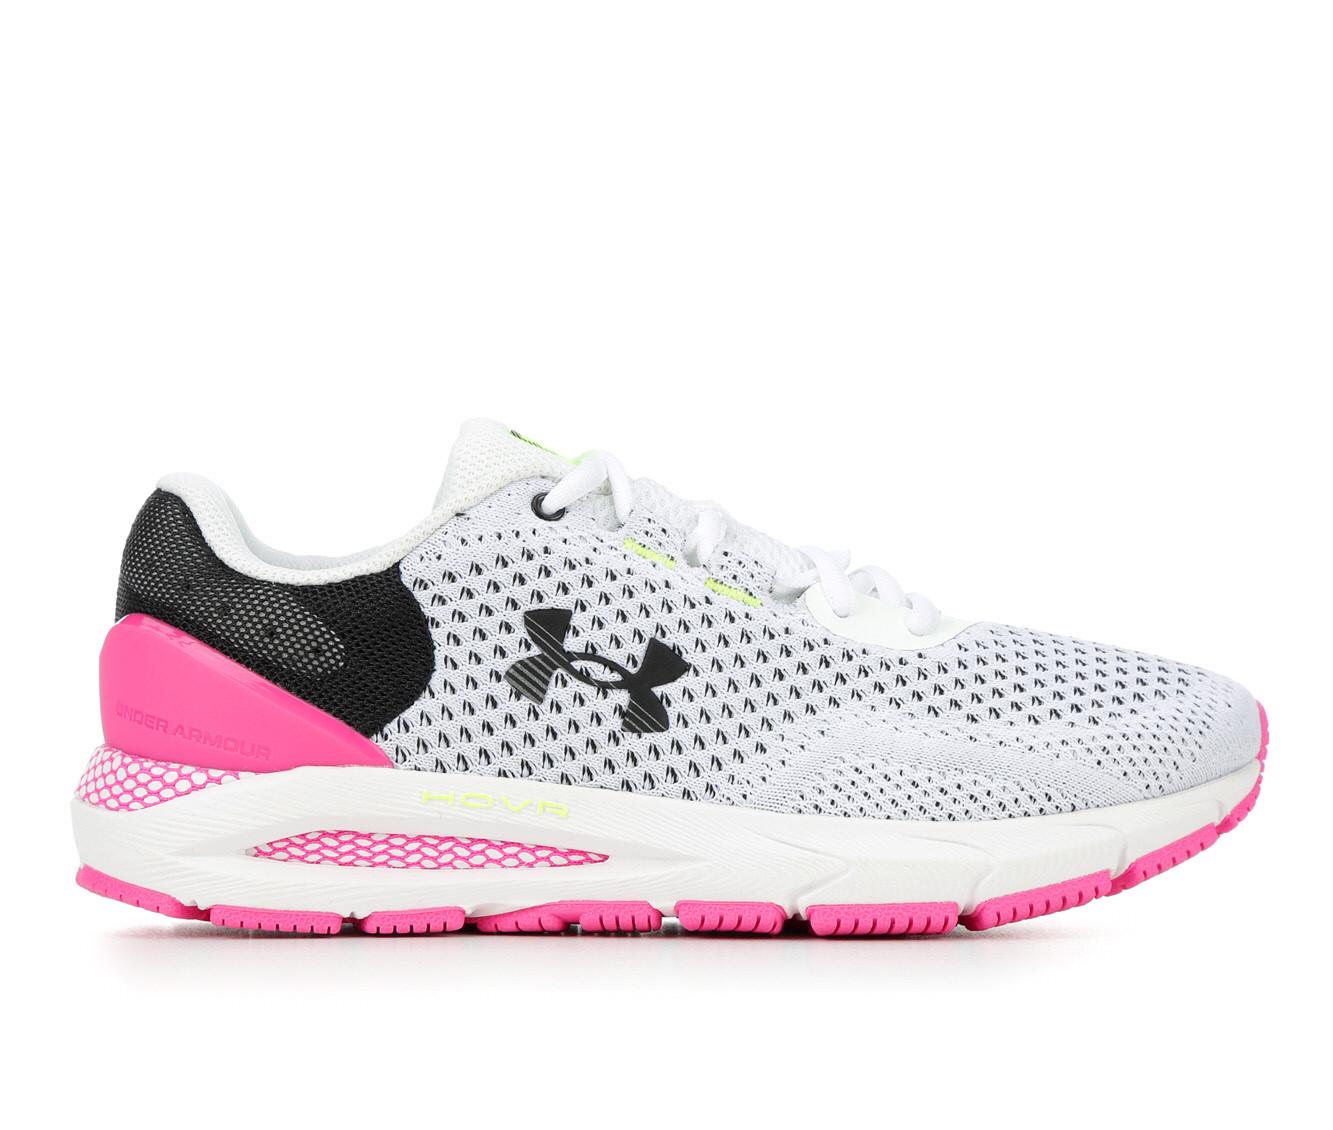 Women's Under Armour HOVR Intake-6 Running Shoes